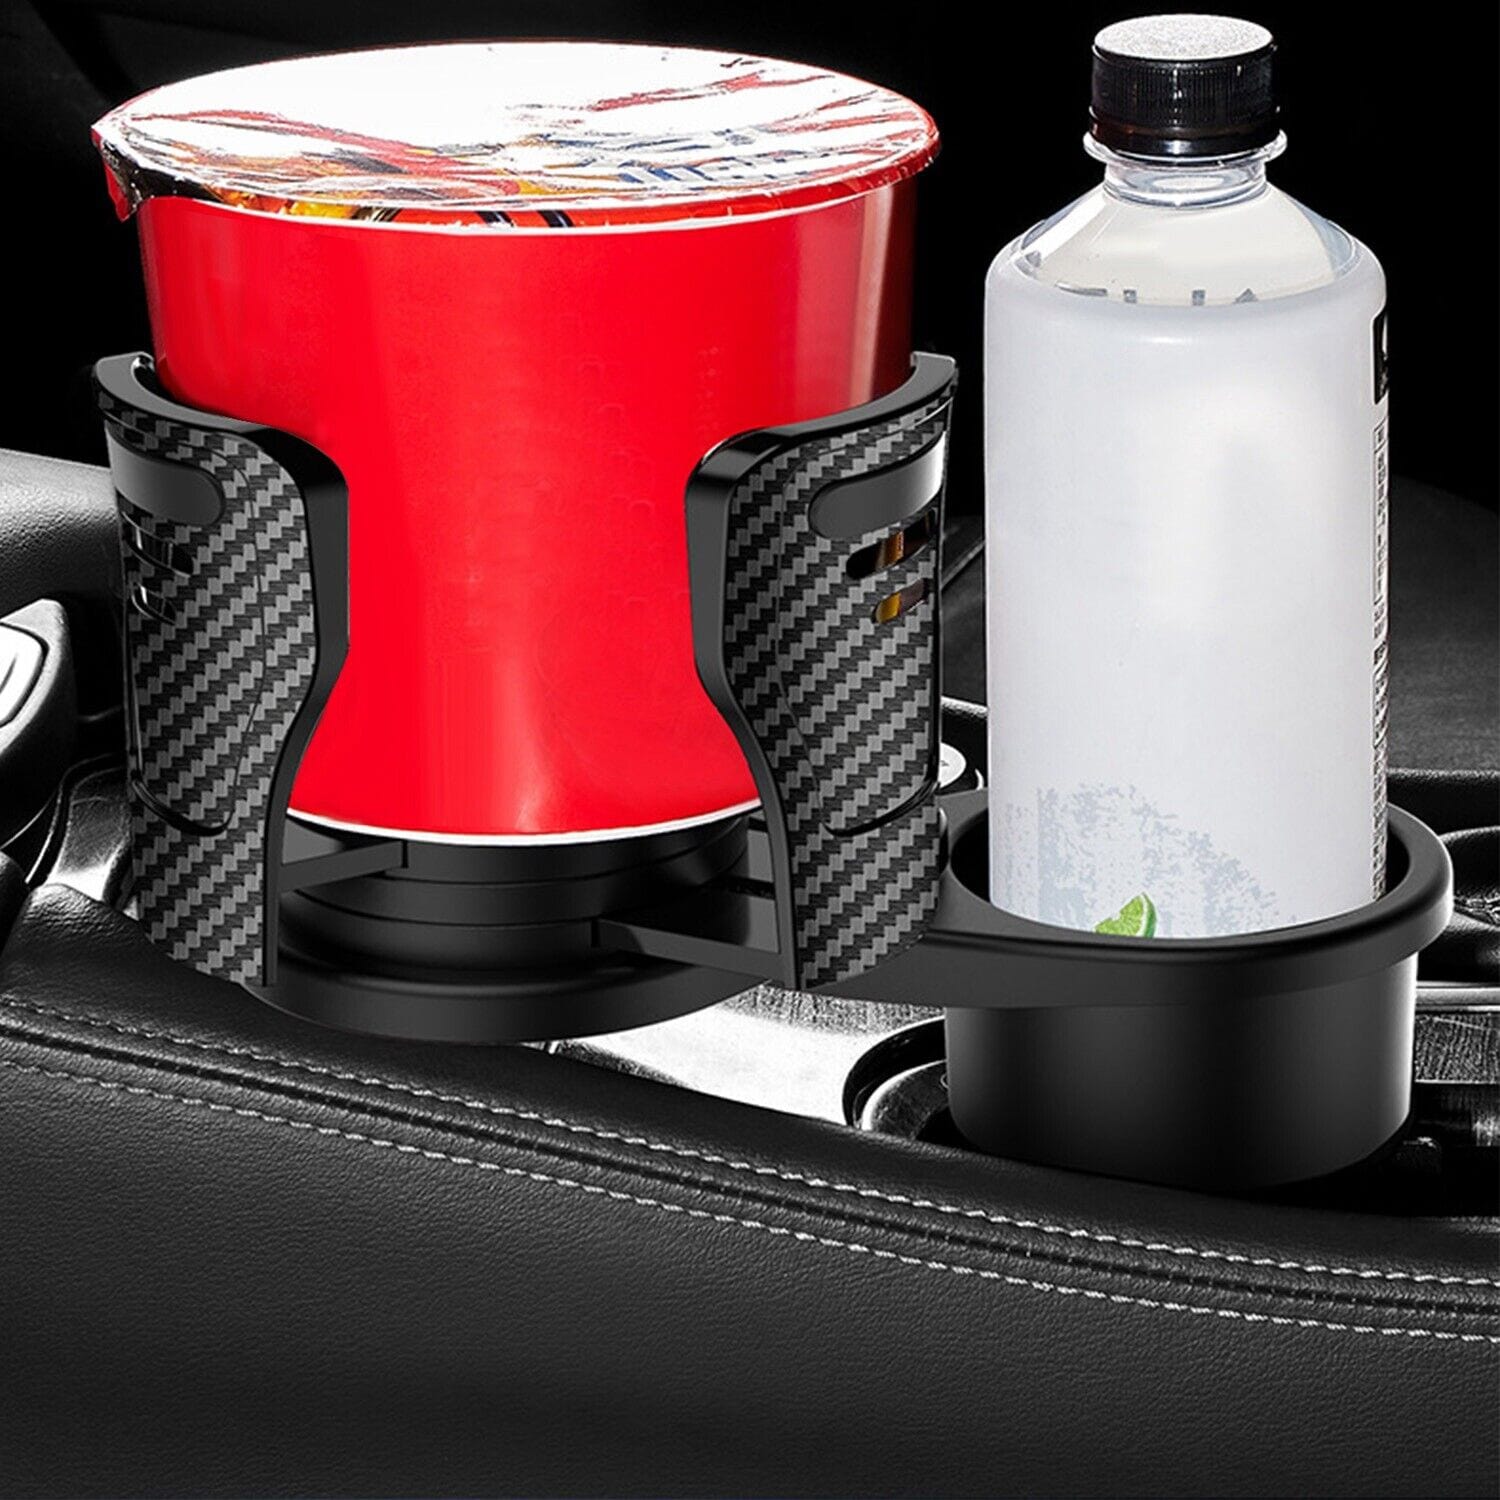 2 in 1 Multifunctional Car Drink Cup Glass Holder - 360° Rotatable Roposo Clout